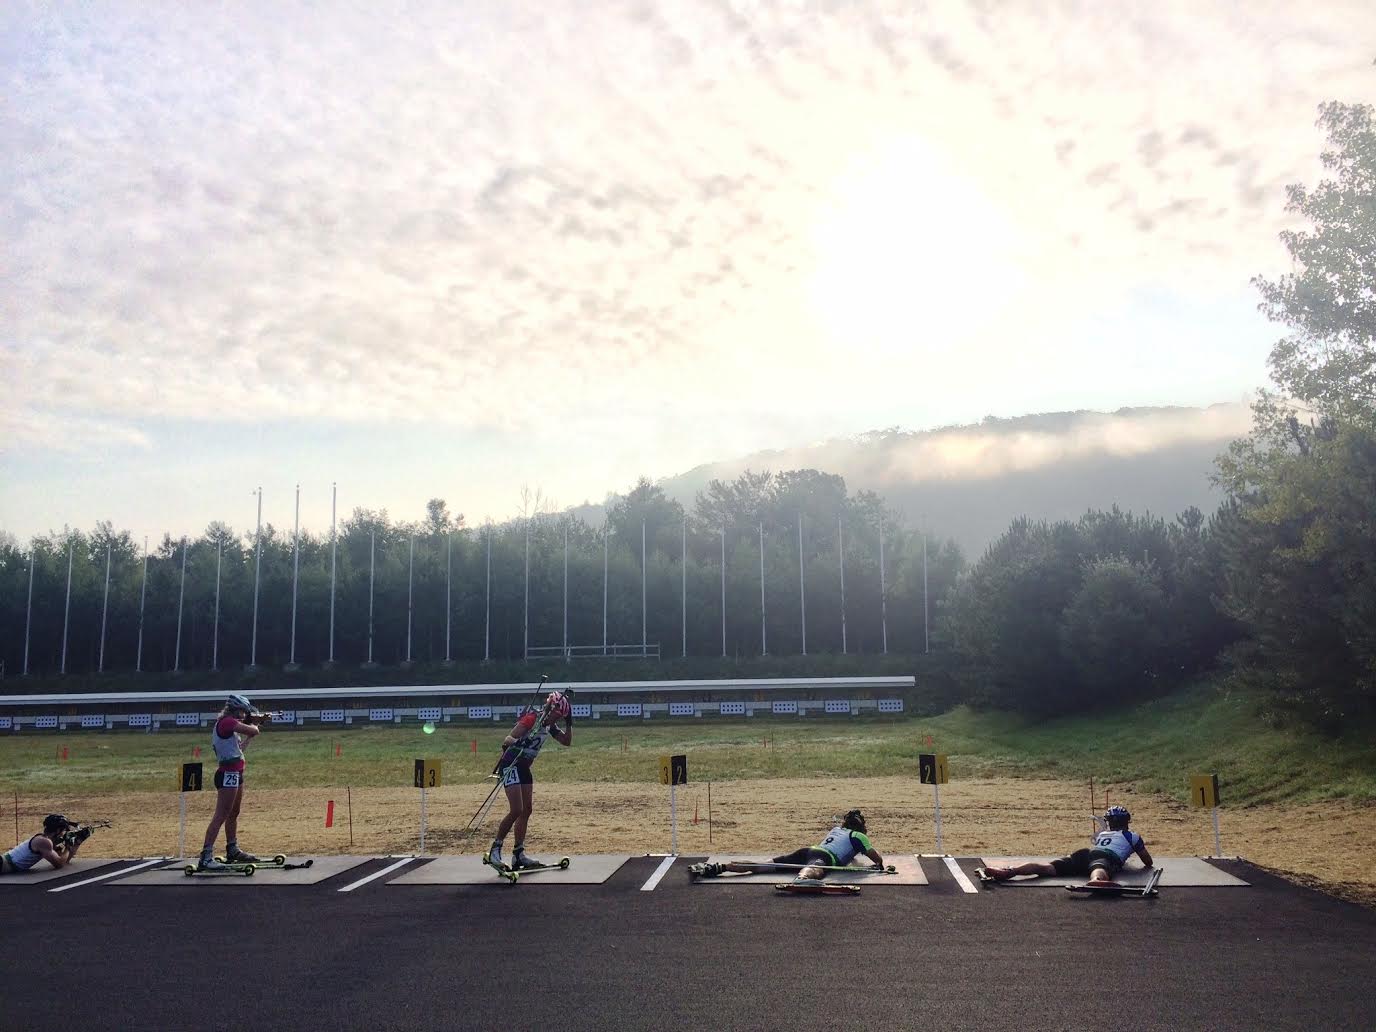 The view from the range at the North American Rollerski Cup race this summer in Jericho, Vermont. (Photo: Sam Dougherty)